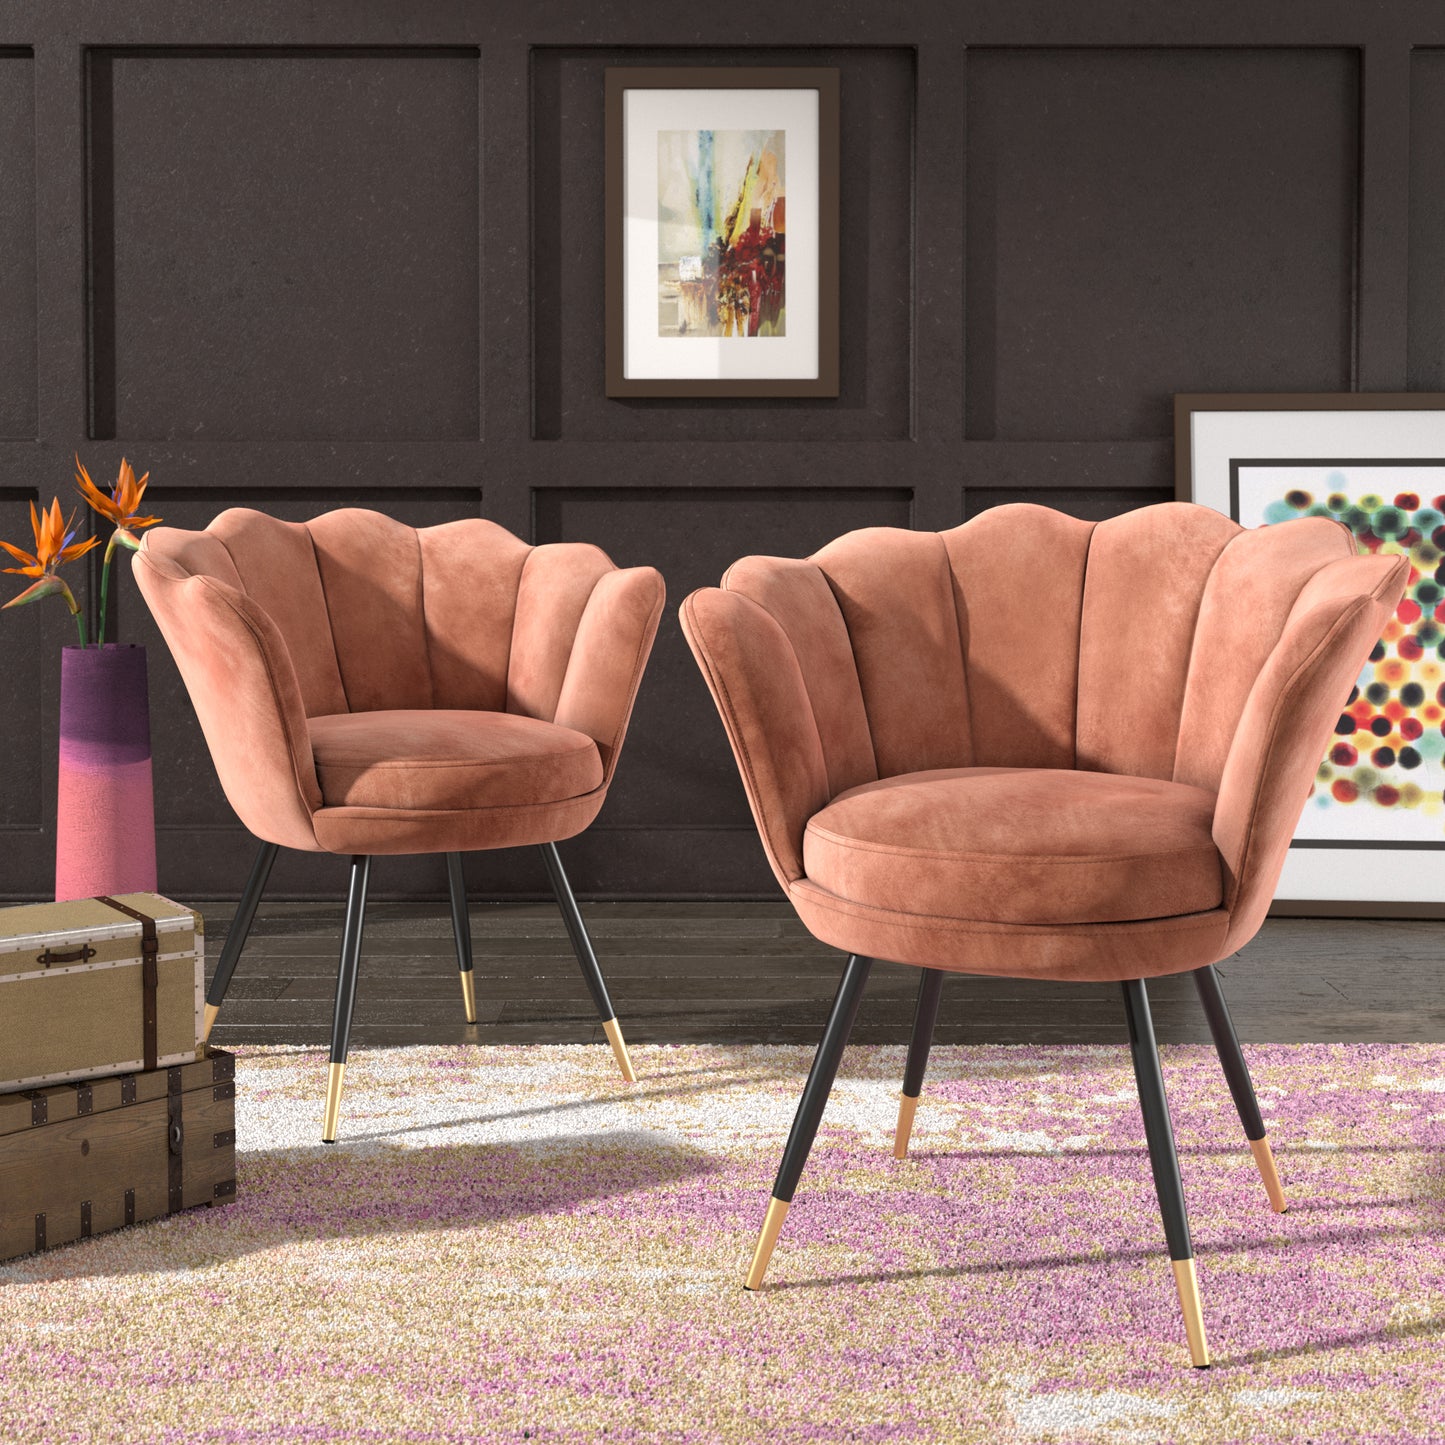 Black and Gold Metal Leg Velvet Seashell Accent Chairs (Set of 2) - Salmon Pink